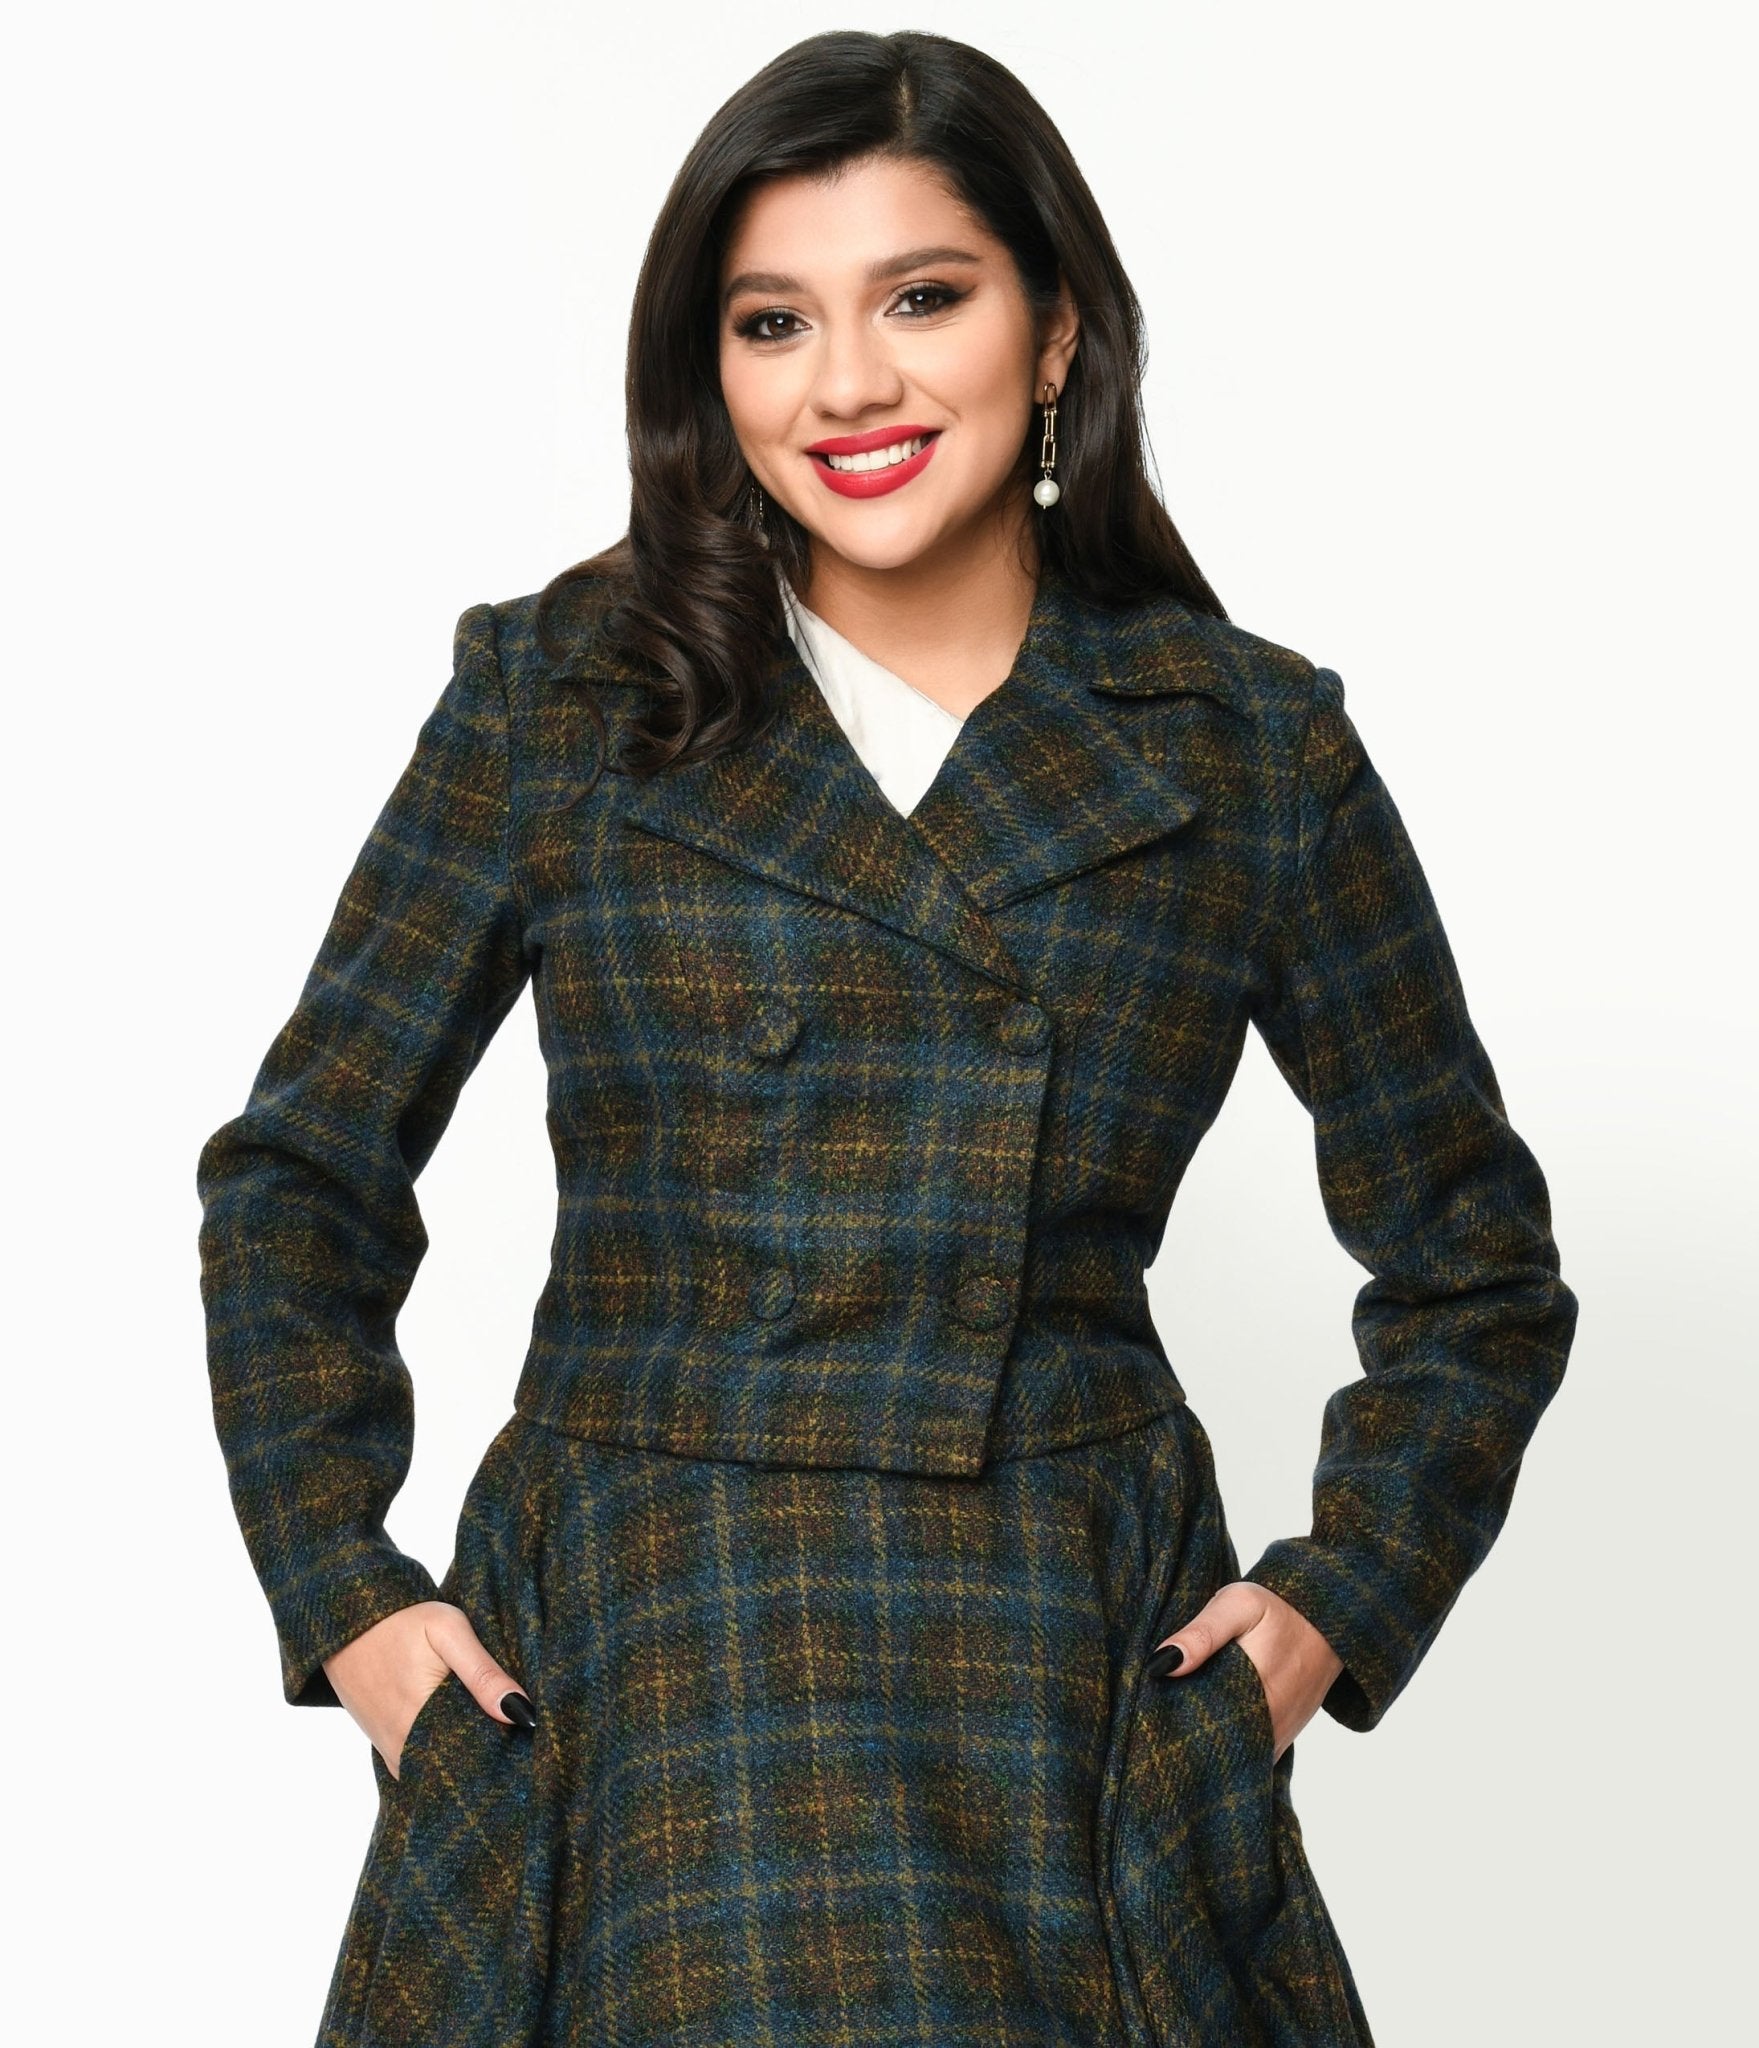 1940s Style Coats and Jackets for Sale Blue  Green Check Plaid Jacket $110.00 AT vintagedancer.com